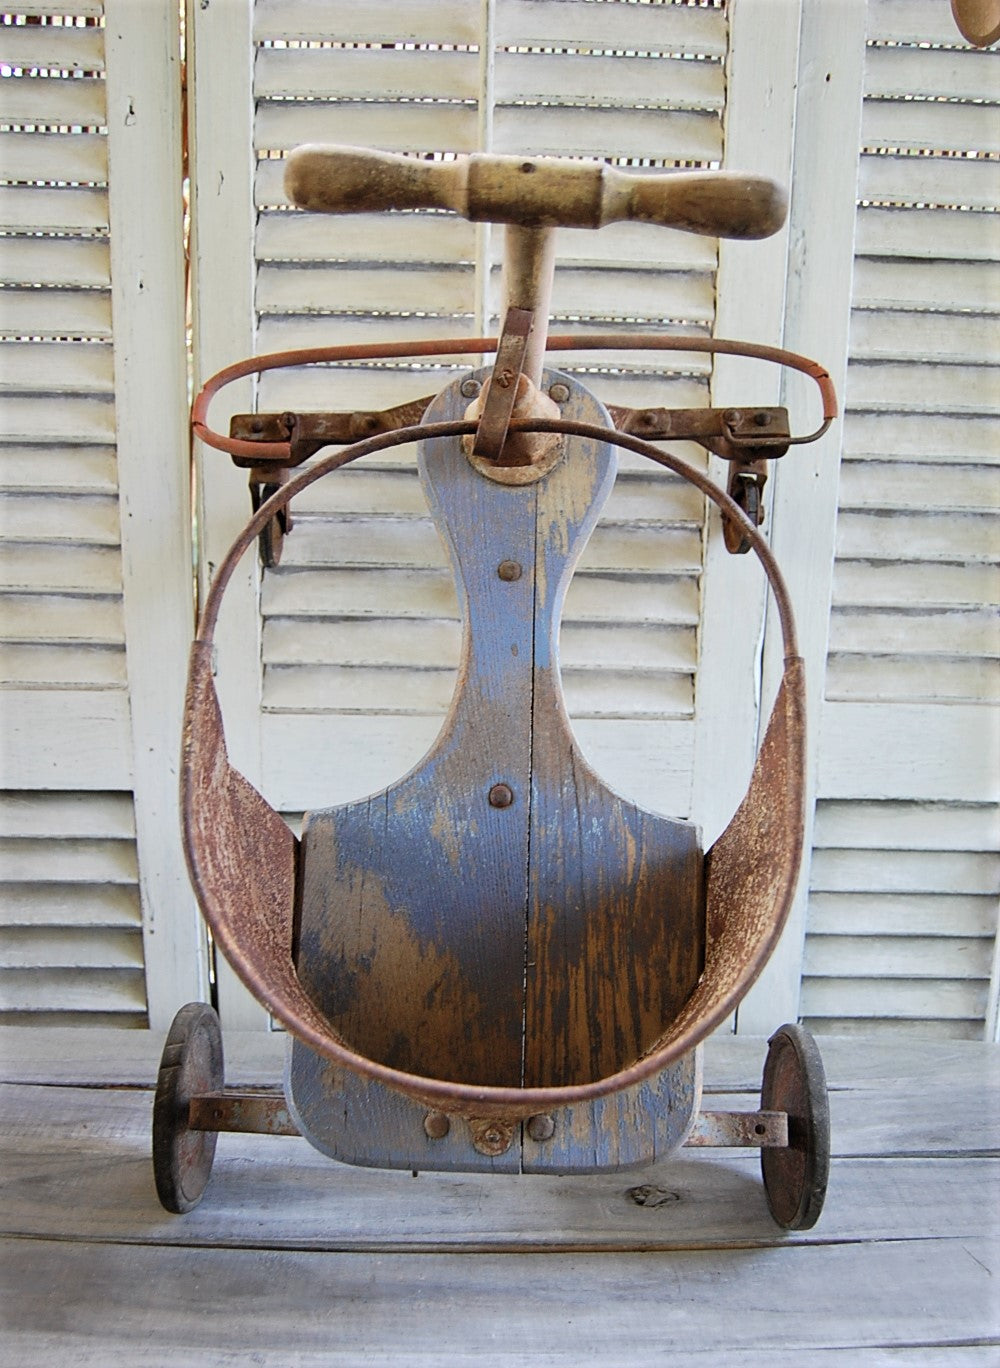 Antique ride-on toy